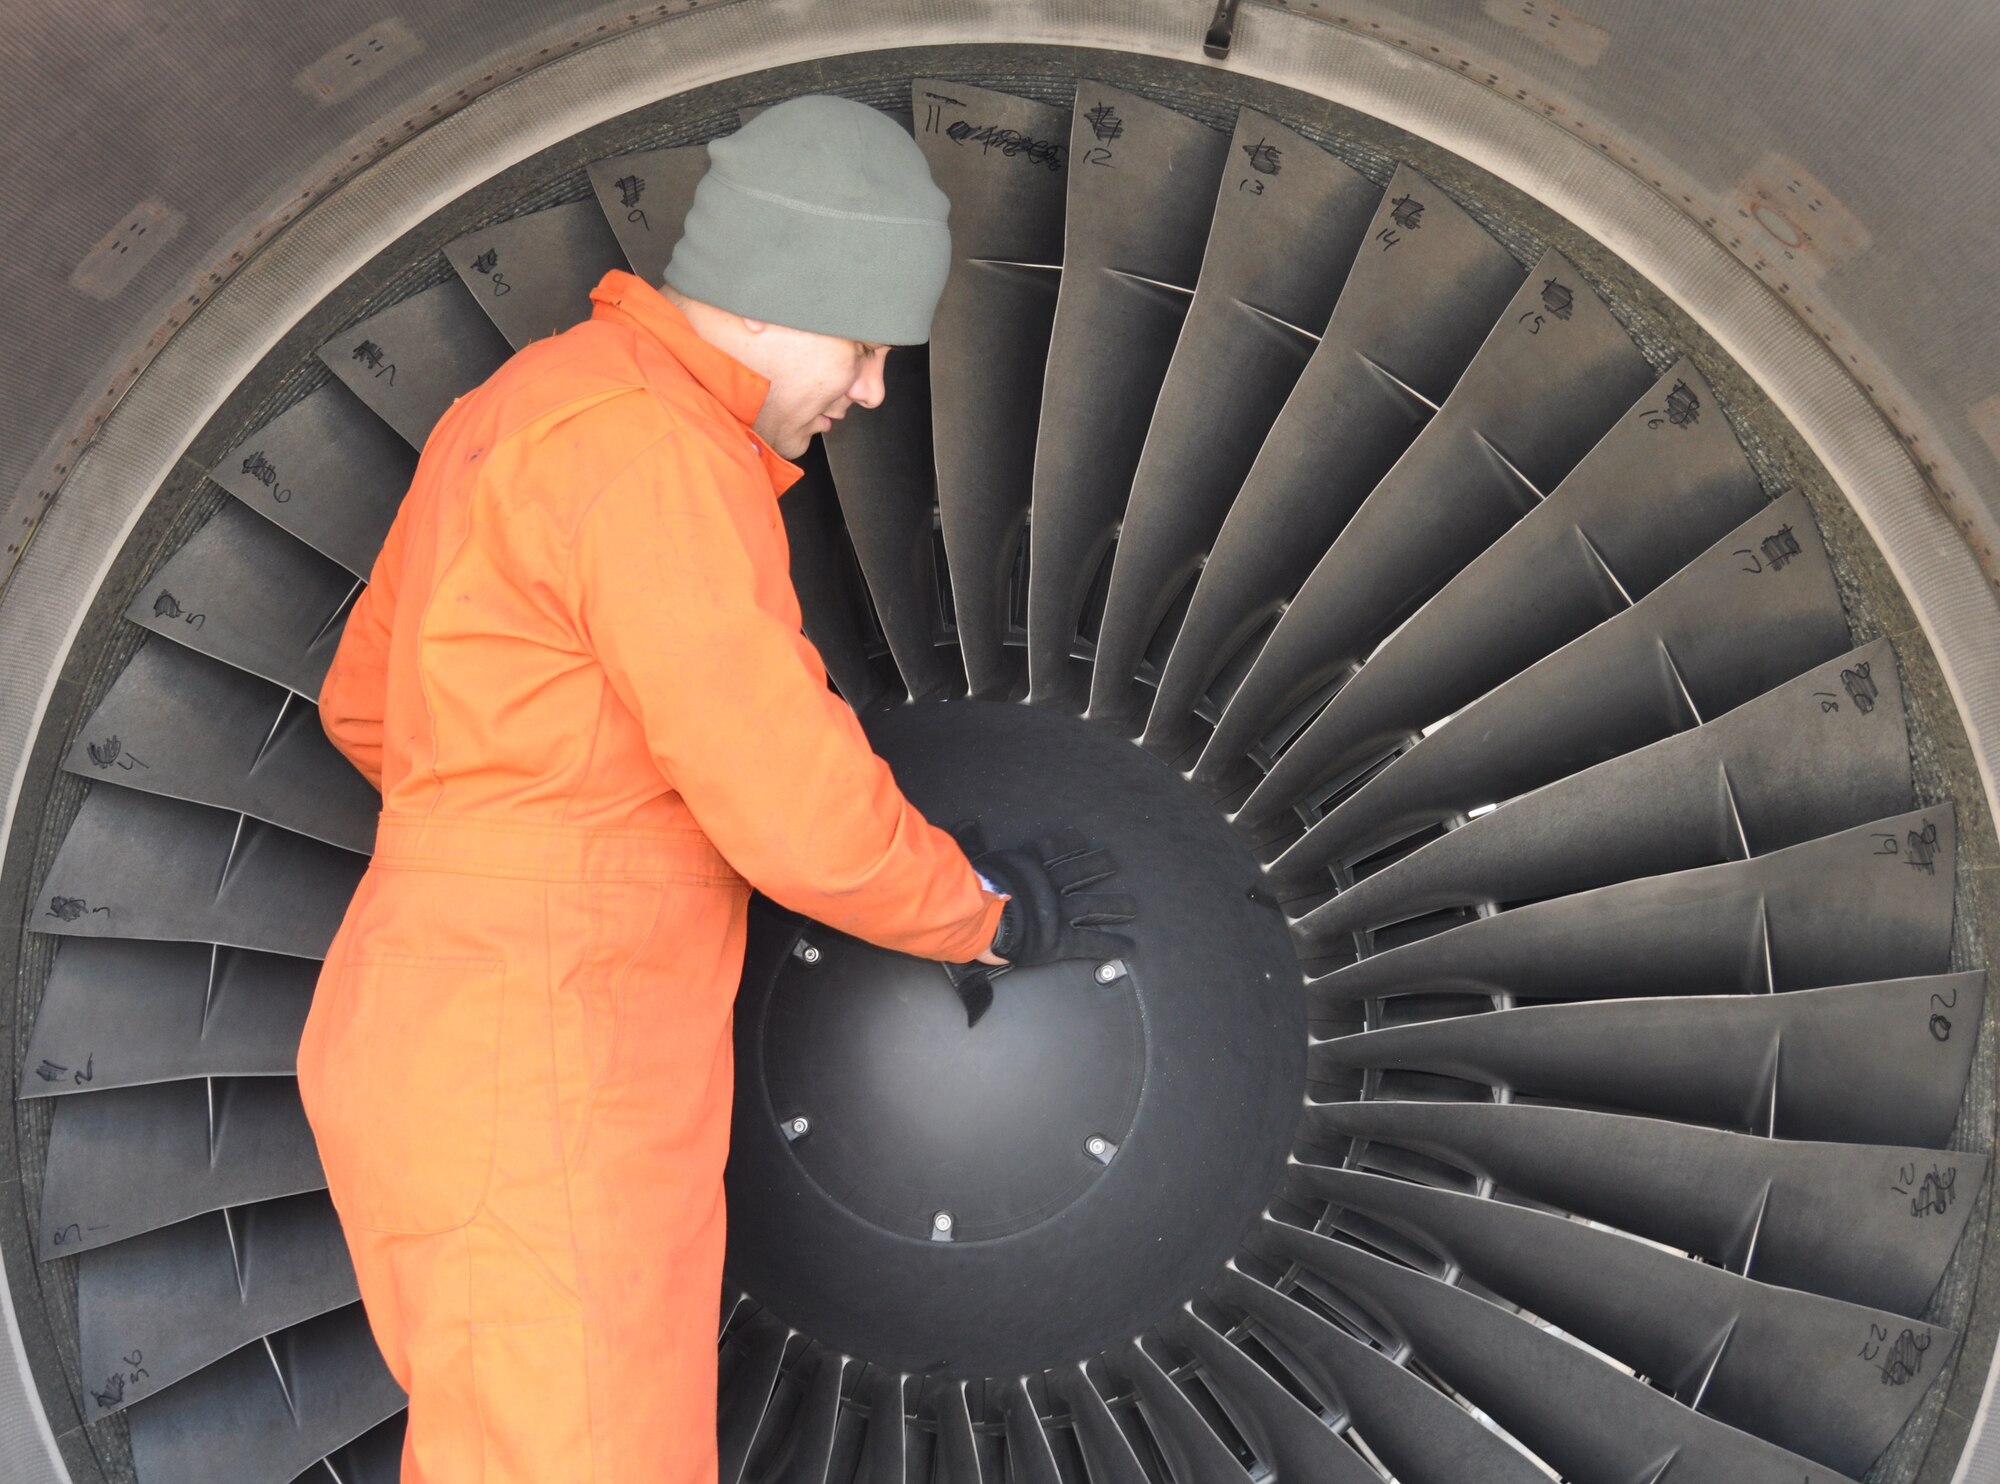 Staff Sgt. Hector Martinez, 514th Aircraft Maintenance Squadron aerospace propulsion technician, conducts a routine inspection of the engine blades of a C-17 Globemaster III aircraft here April 5 (U.S. Air Force photo/Senior Airman Chelsea Smith).